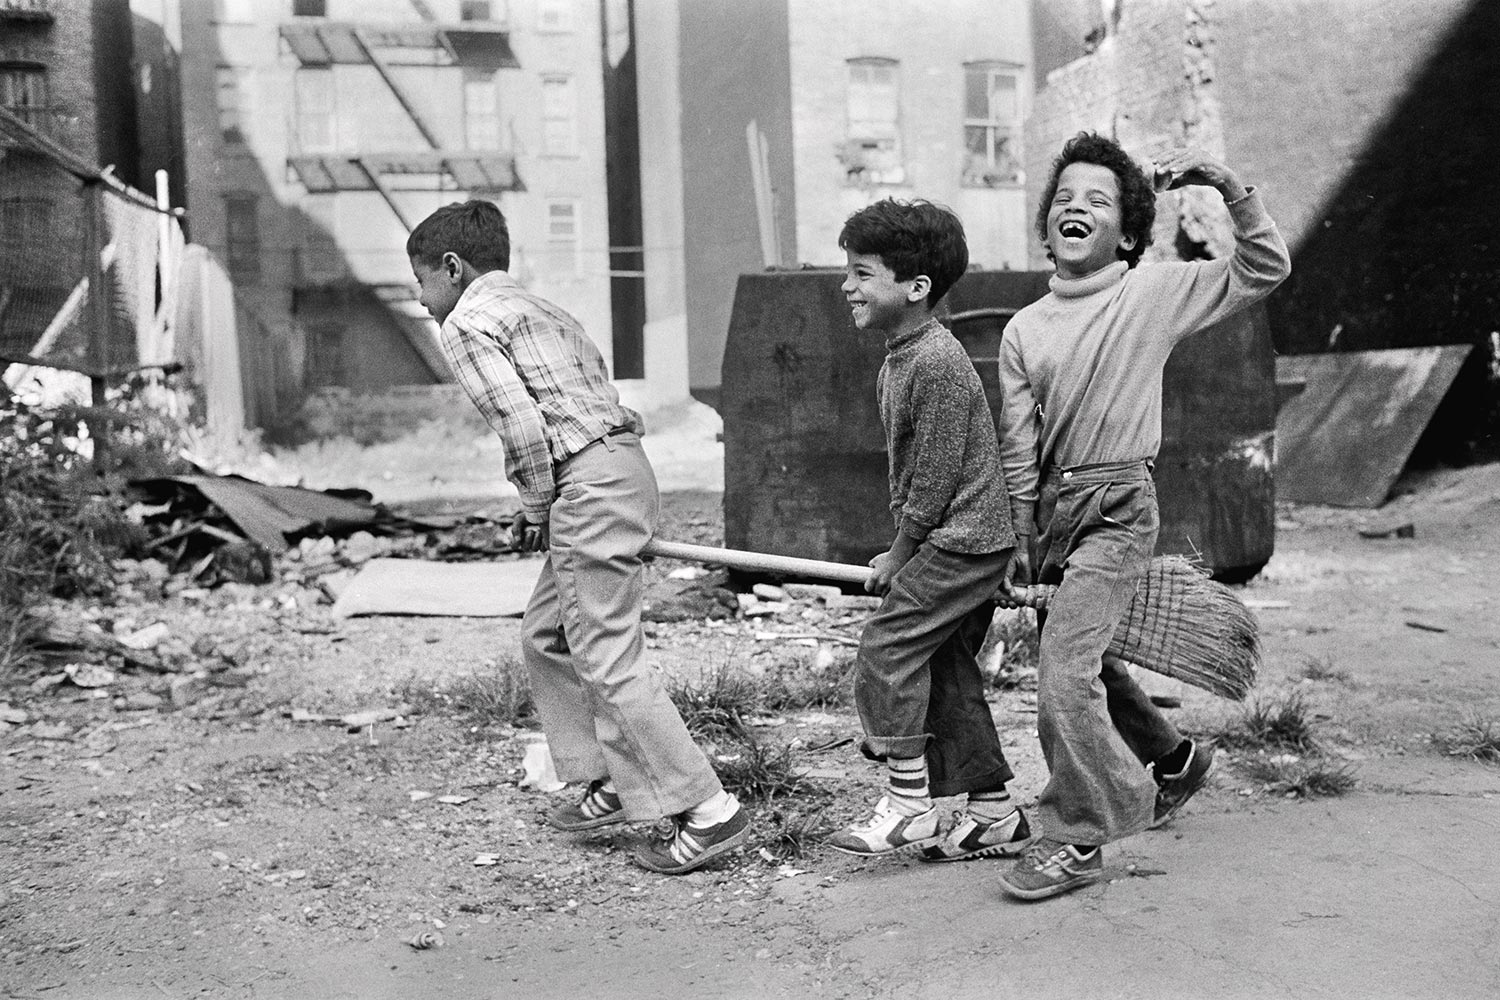 Lower East Side, New York City, 1978. Kids playing in the street